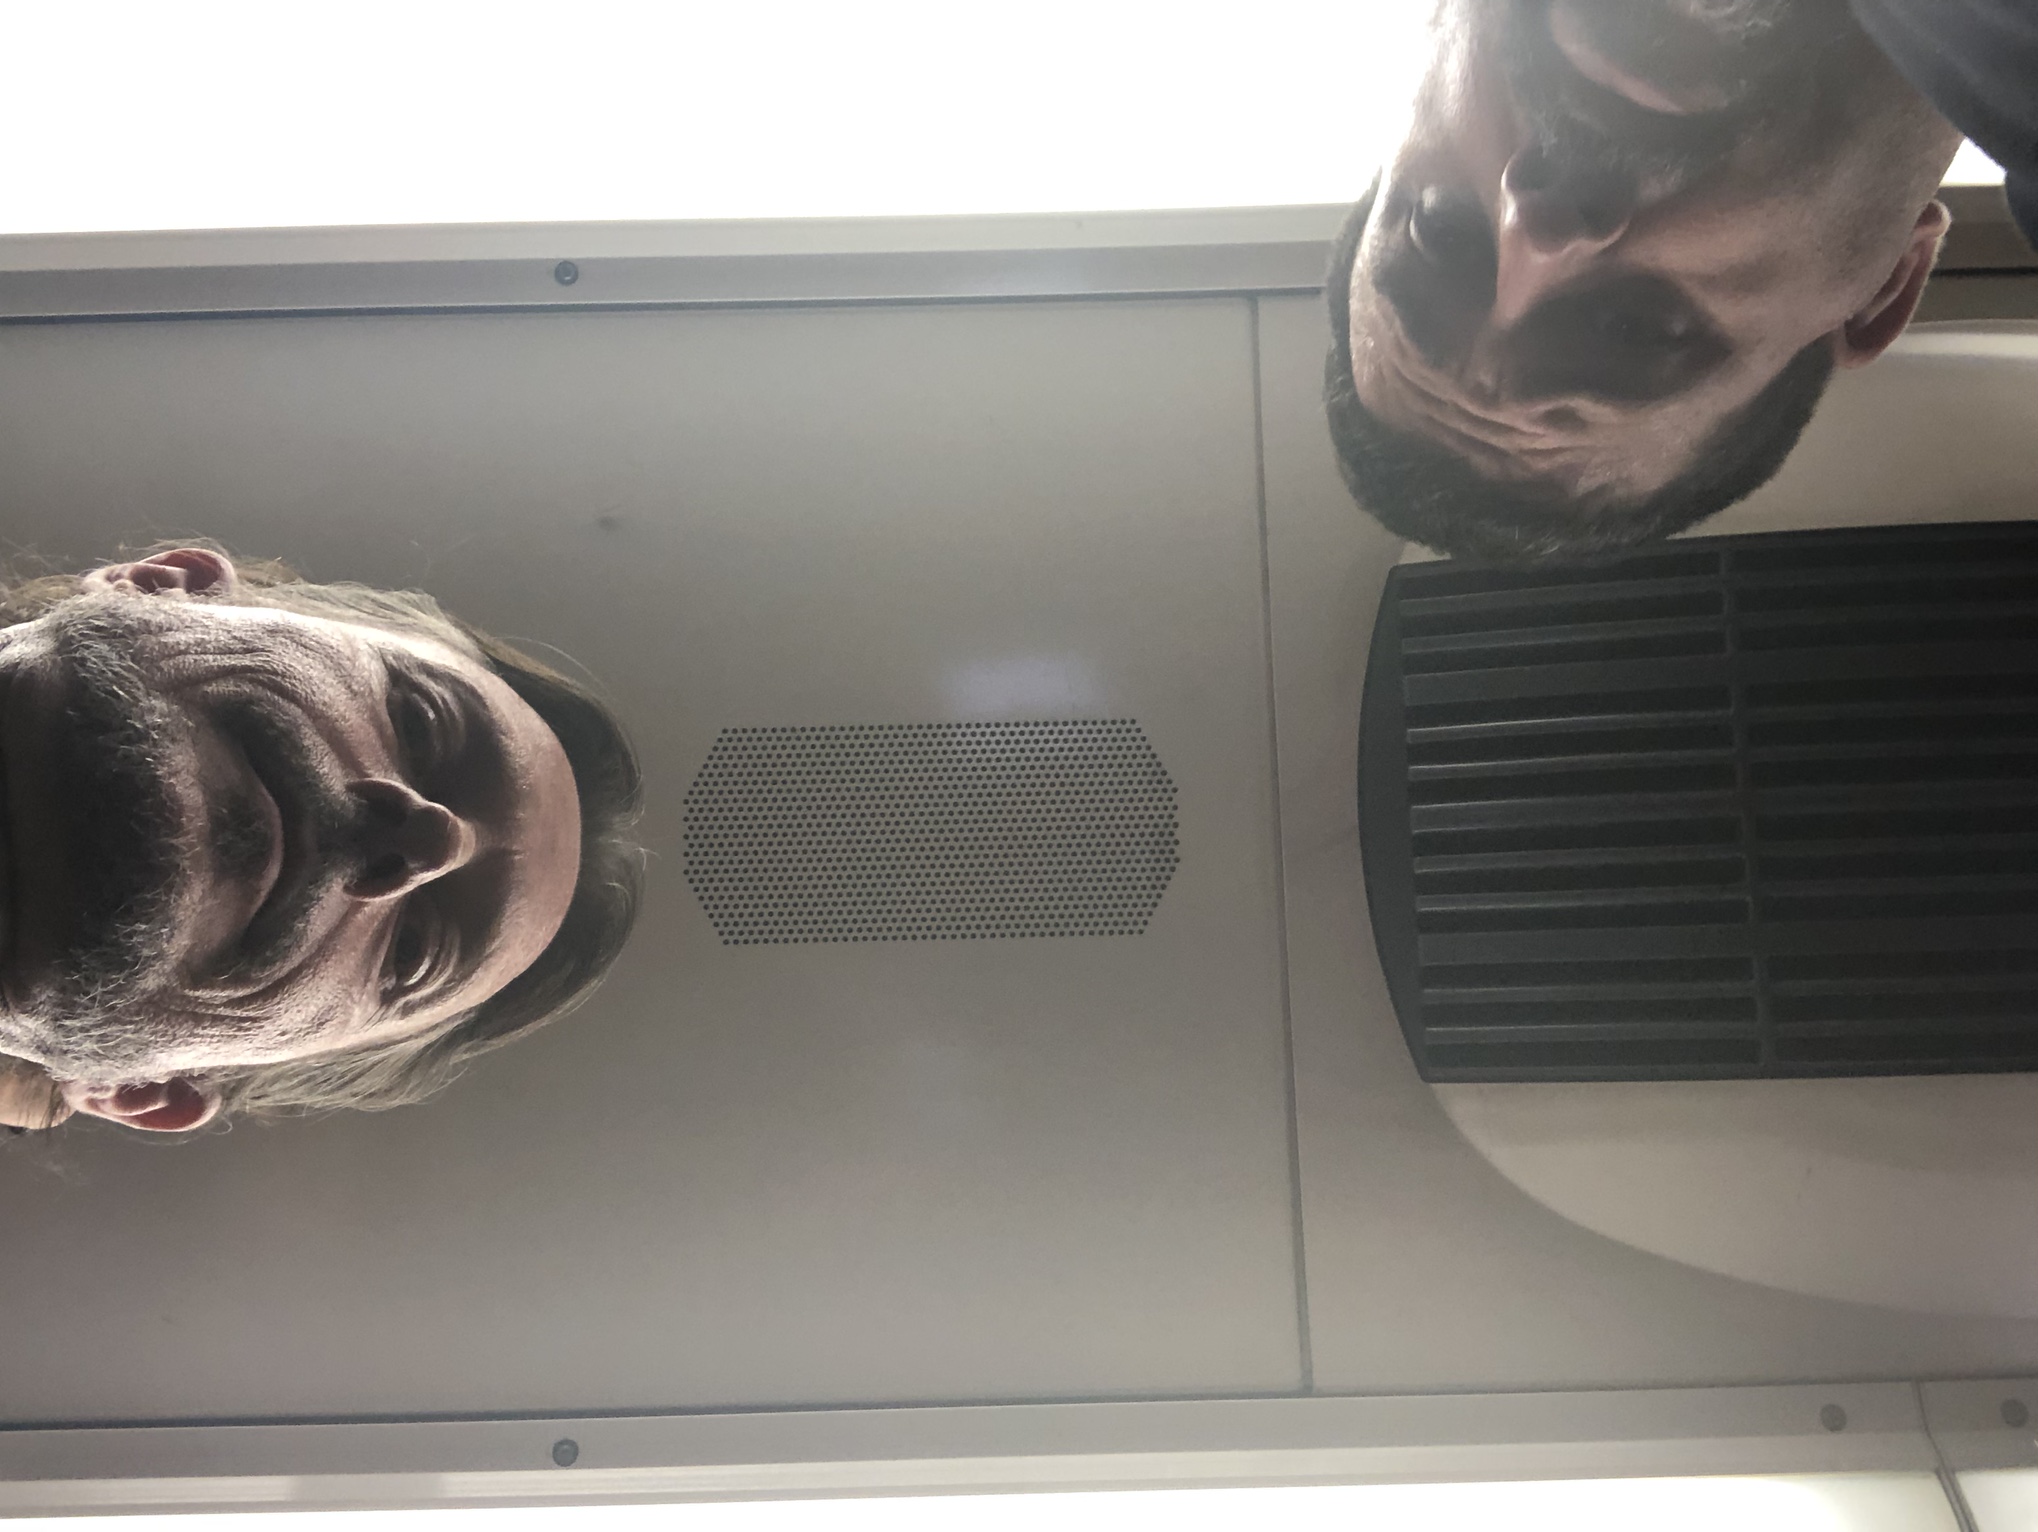 Allan Sturm and Rico Rodriguez Selfie in an Airplane